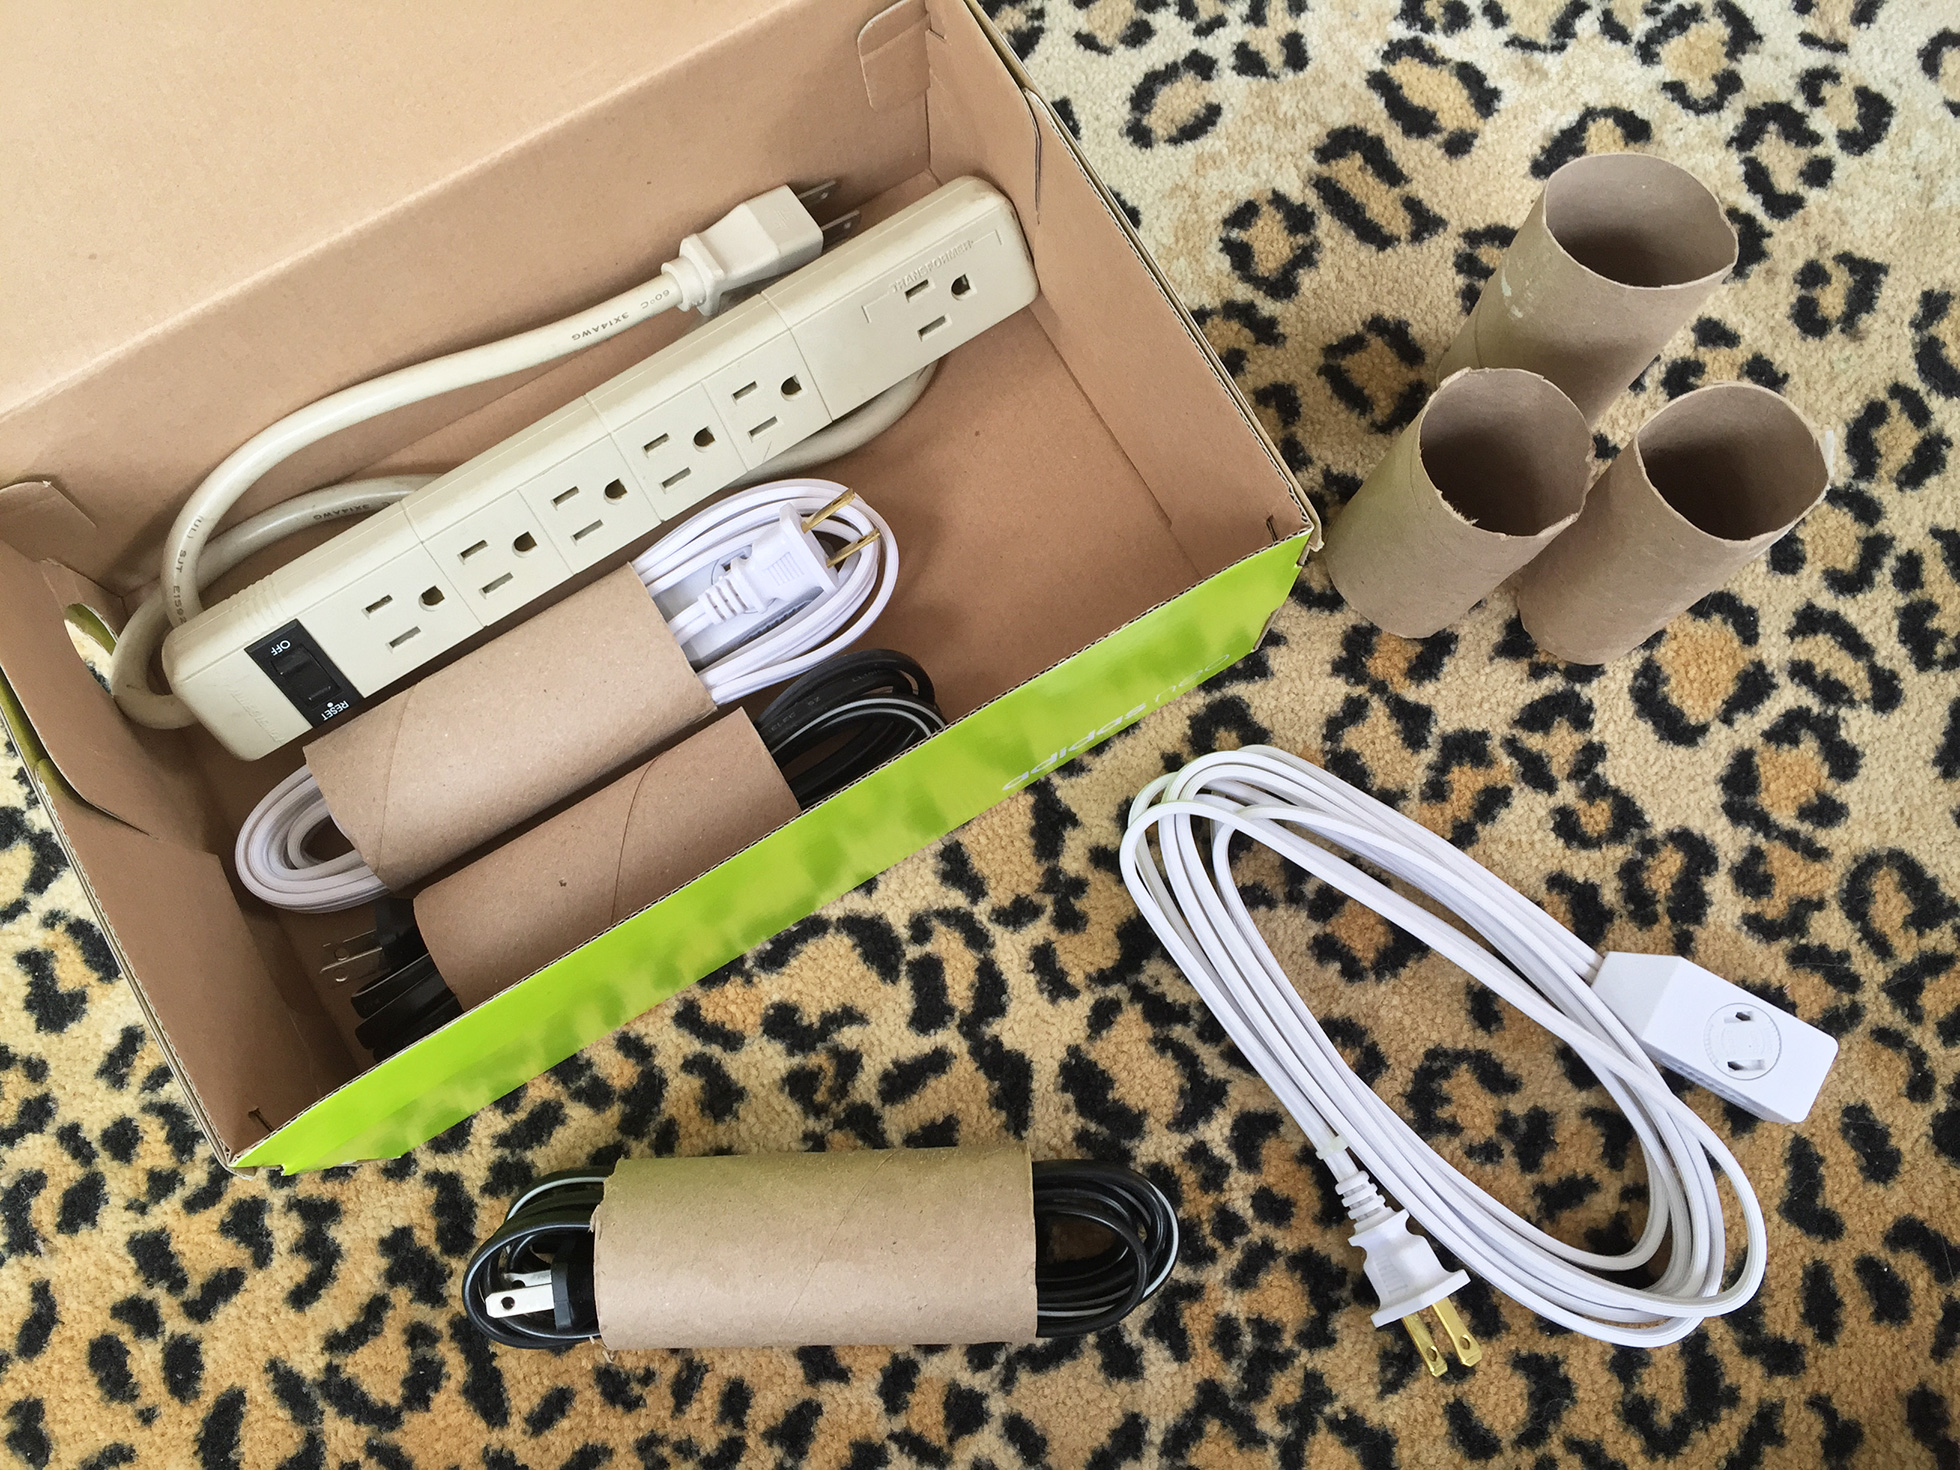 Organize power cords when moving by using toilet paper rolls